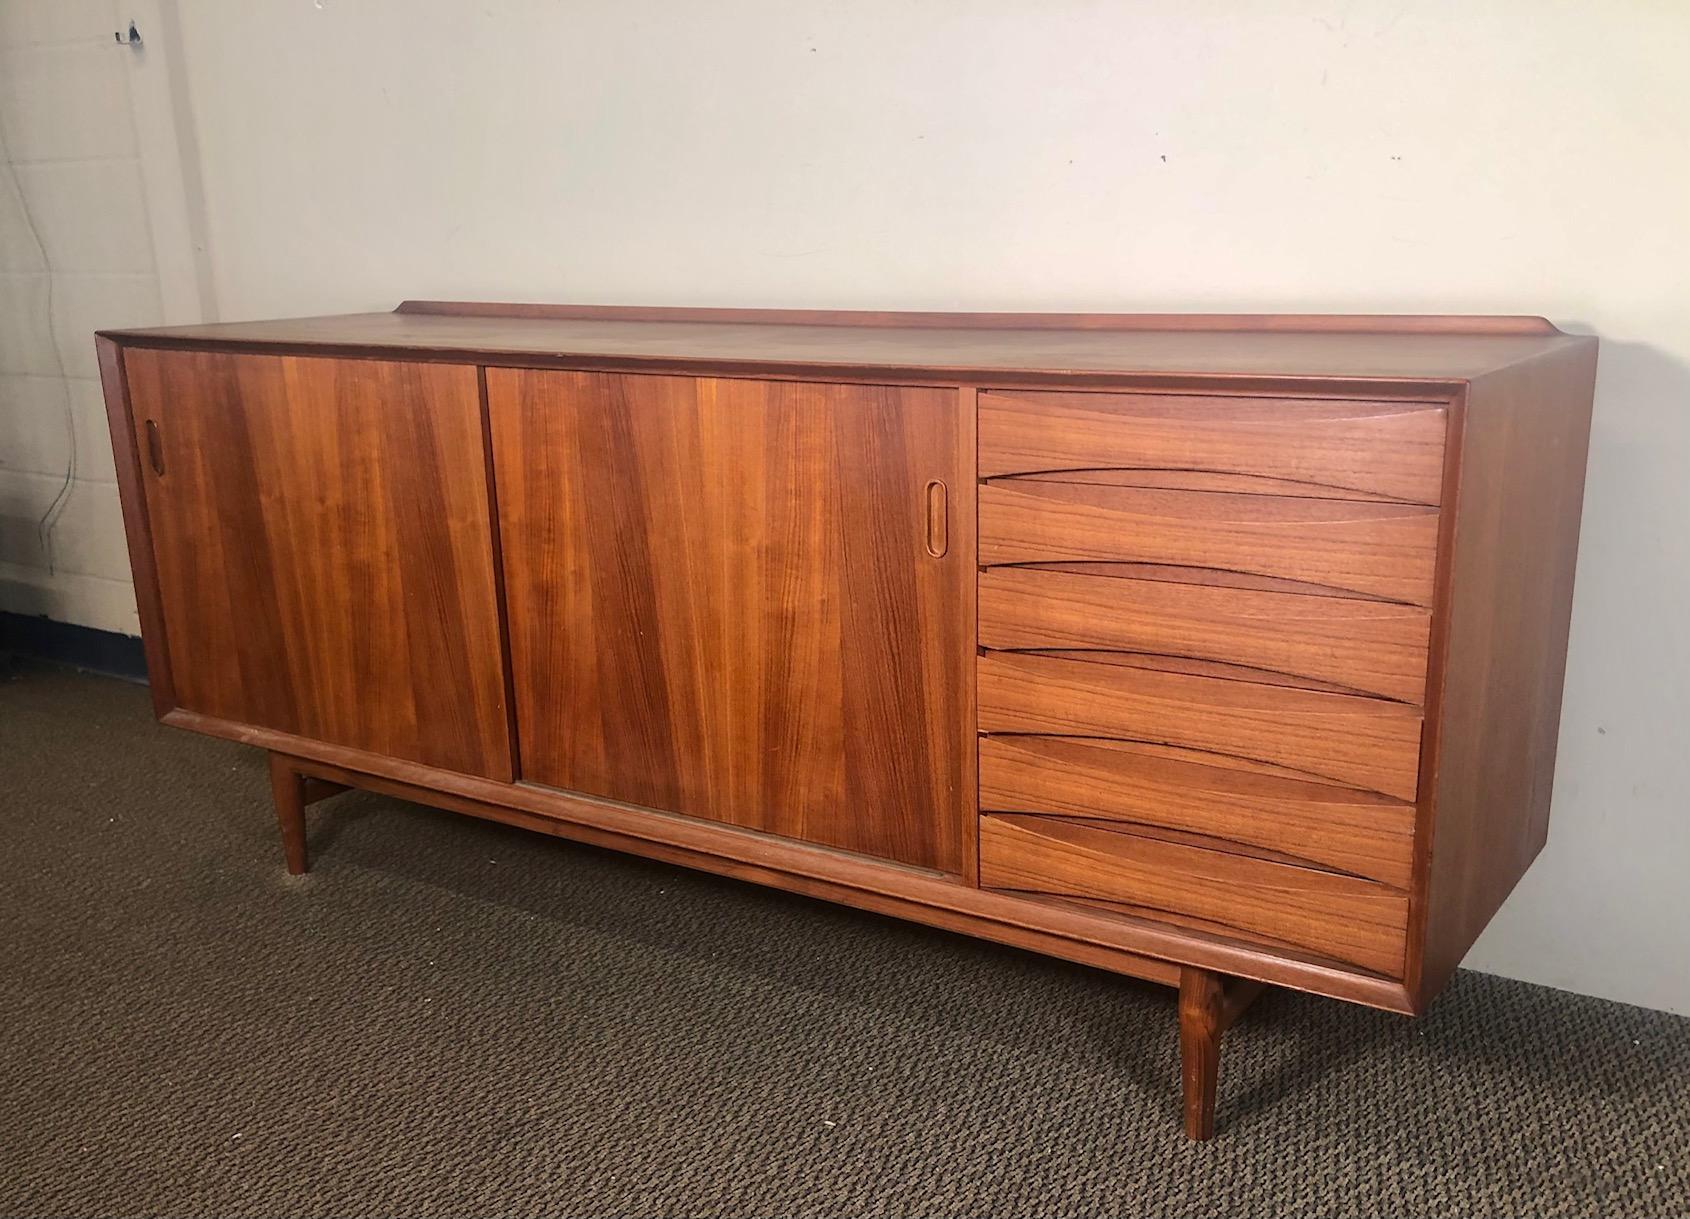 Amazing teak credenza by Arne Vodder for Sibast. Model 29.
Adjustable shelves. Finished back. Clean drawers all glide well.

Unrestored original finish. Some marks on the top and other small marks and scuffs consistent with age and